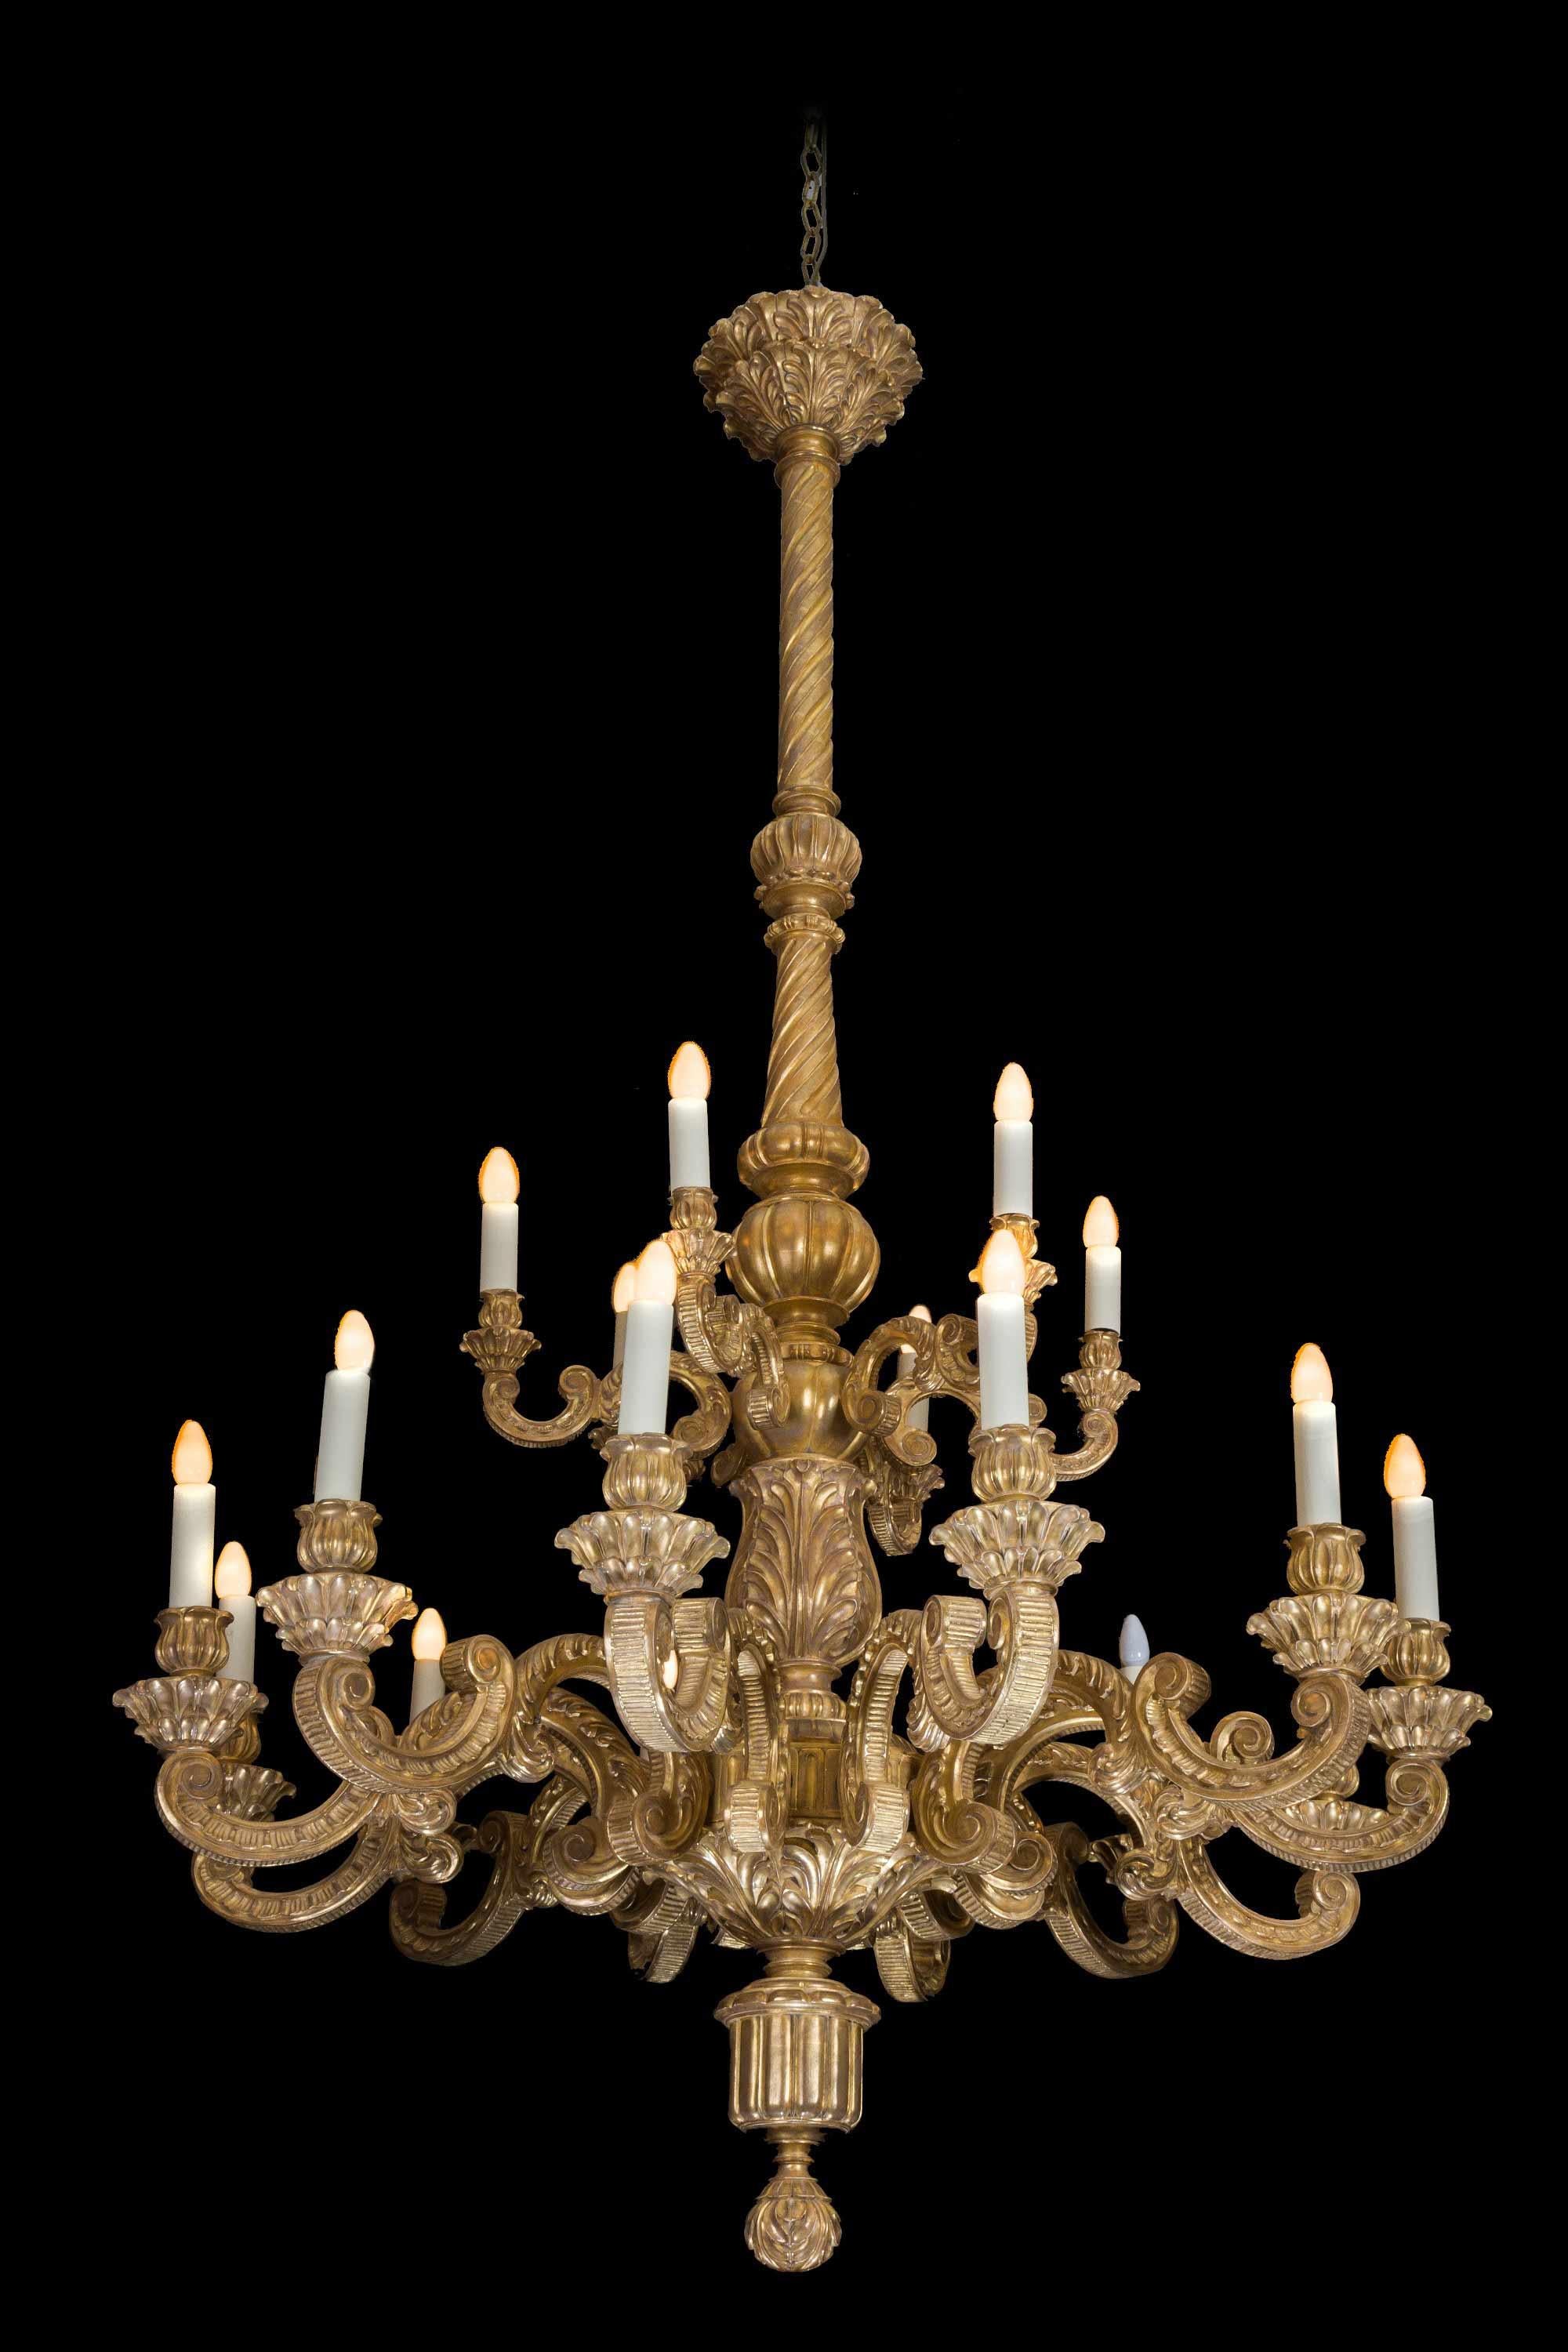 19th Century Giltwood Chandelier In Good Condition For Sale In Peterborough, Northamptonshire